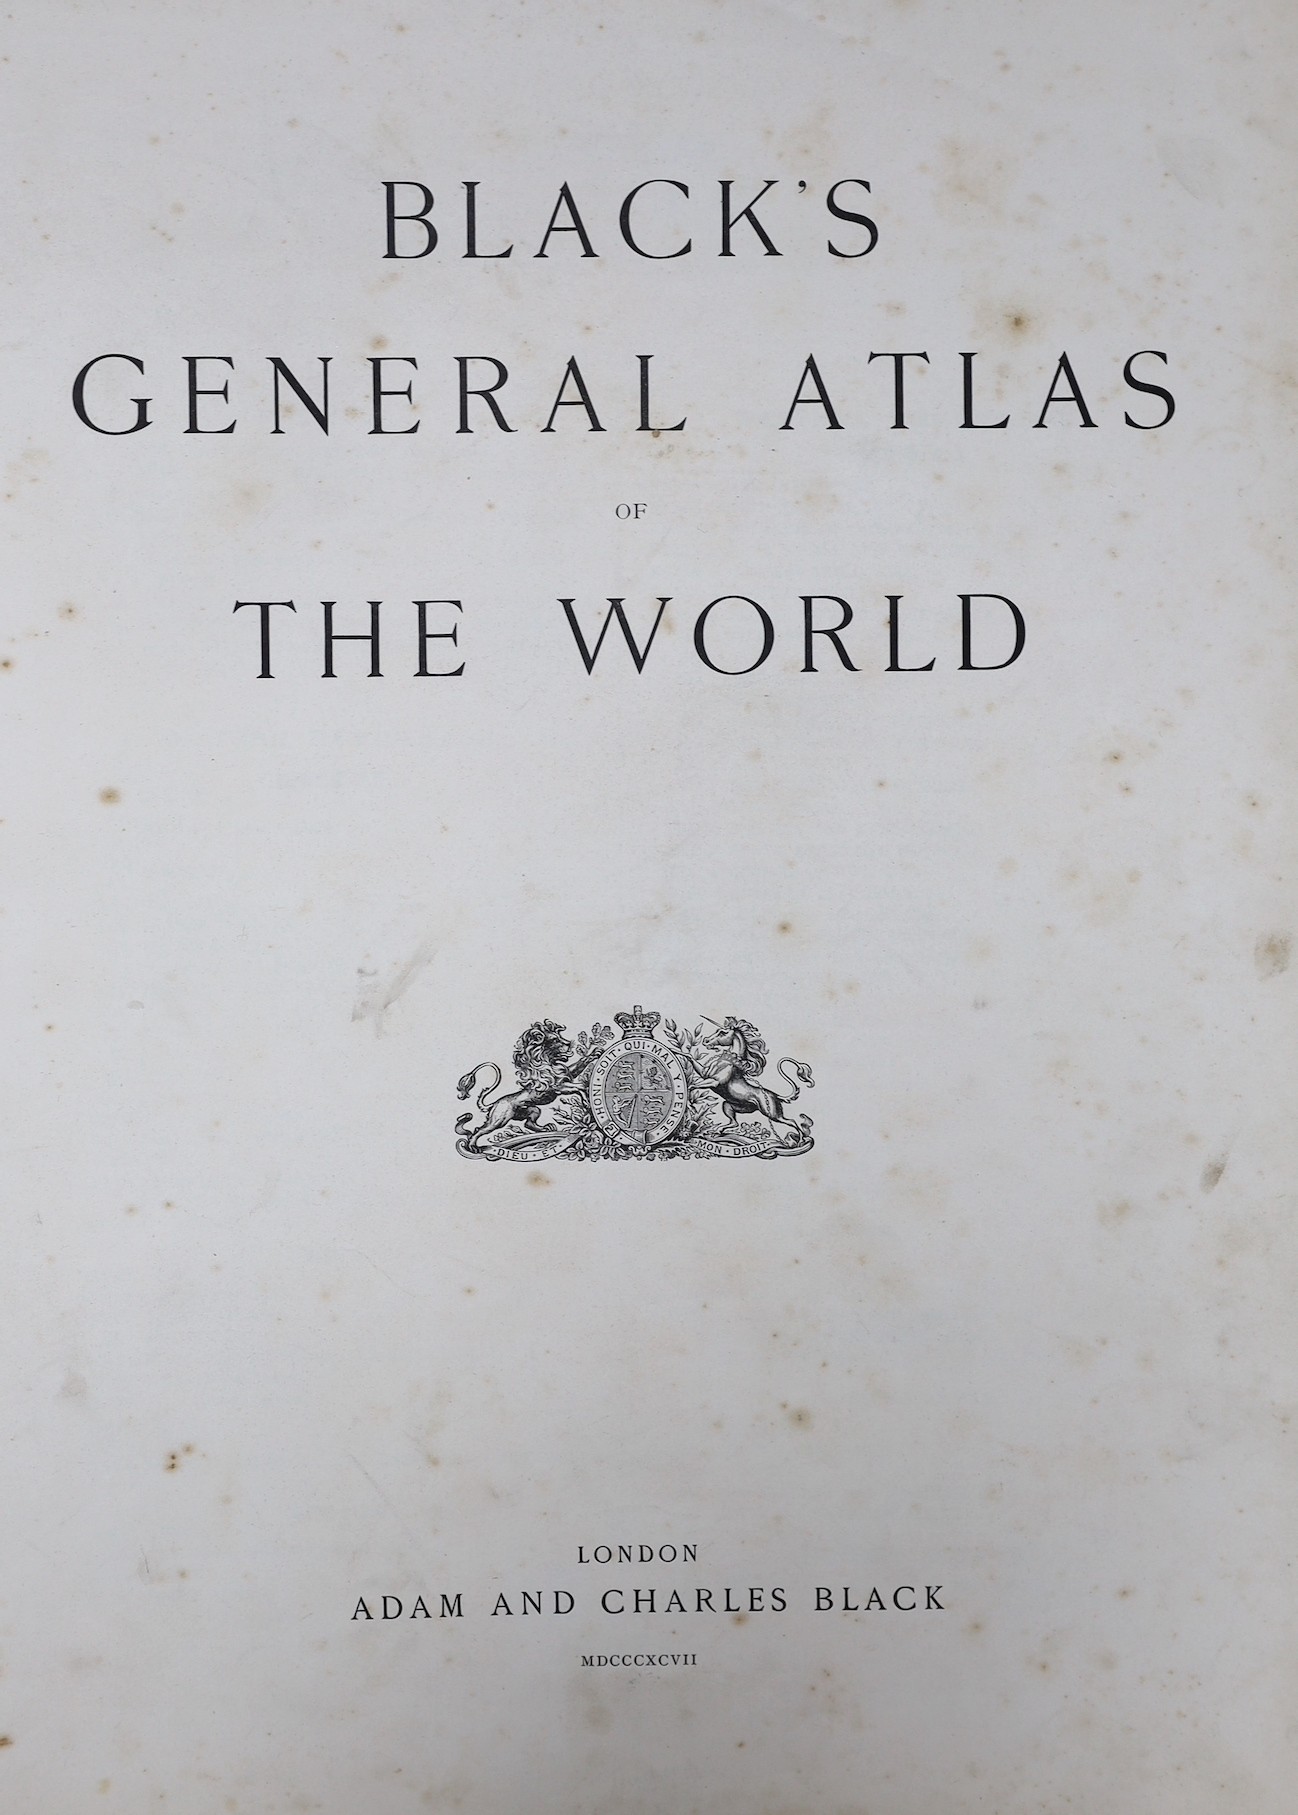 Black's General Atlas of the World. coloured (flags) frontis., many coloured maps (some d-page); newly rebound unlettered green half morocco and paper boards